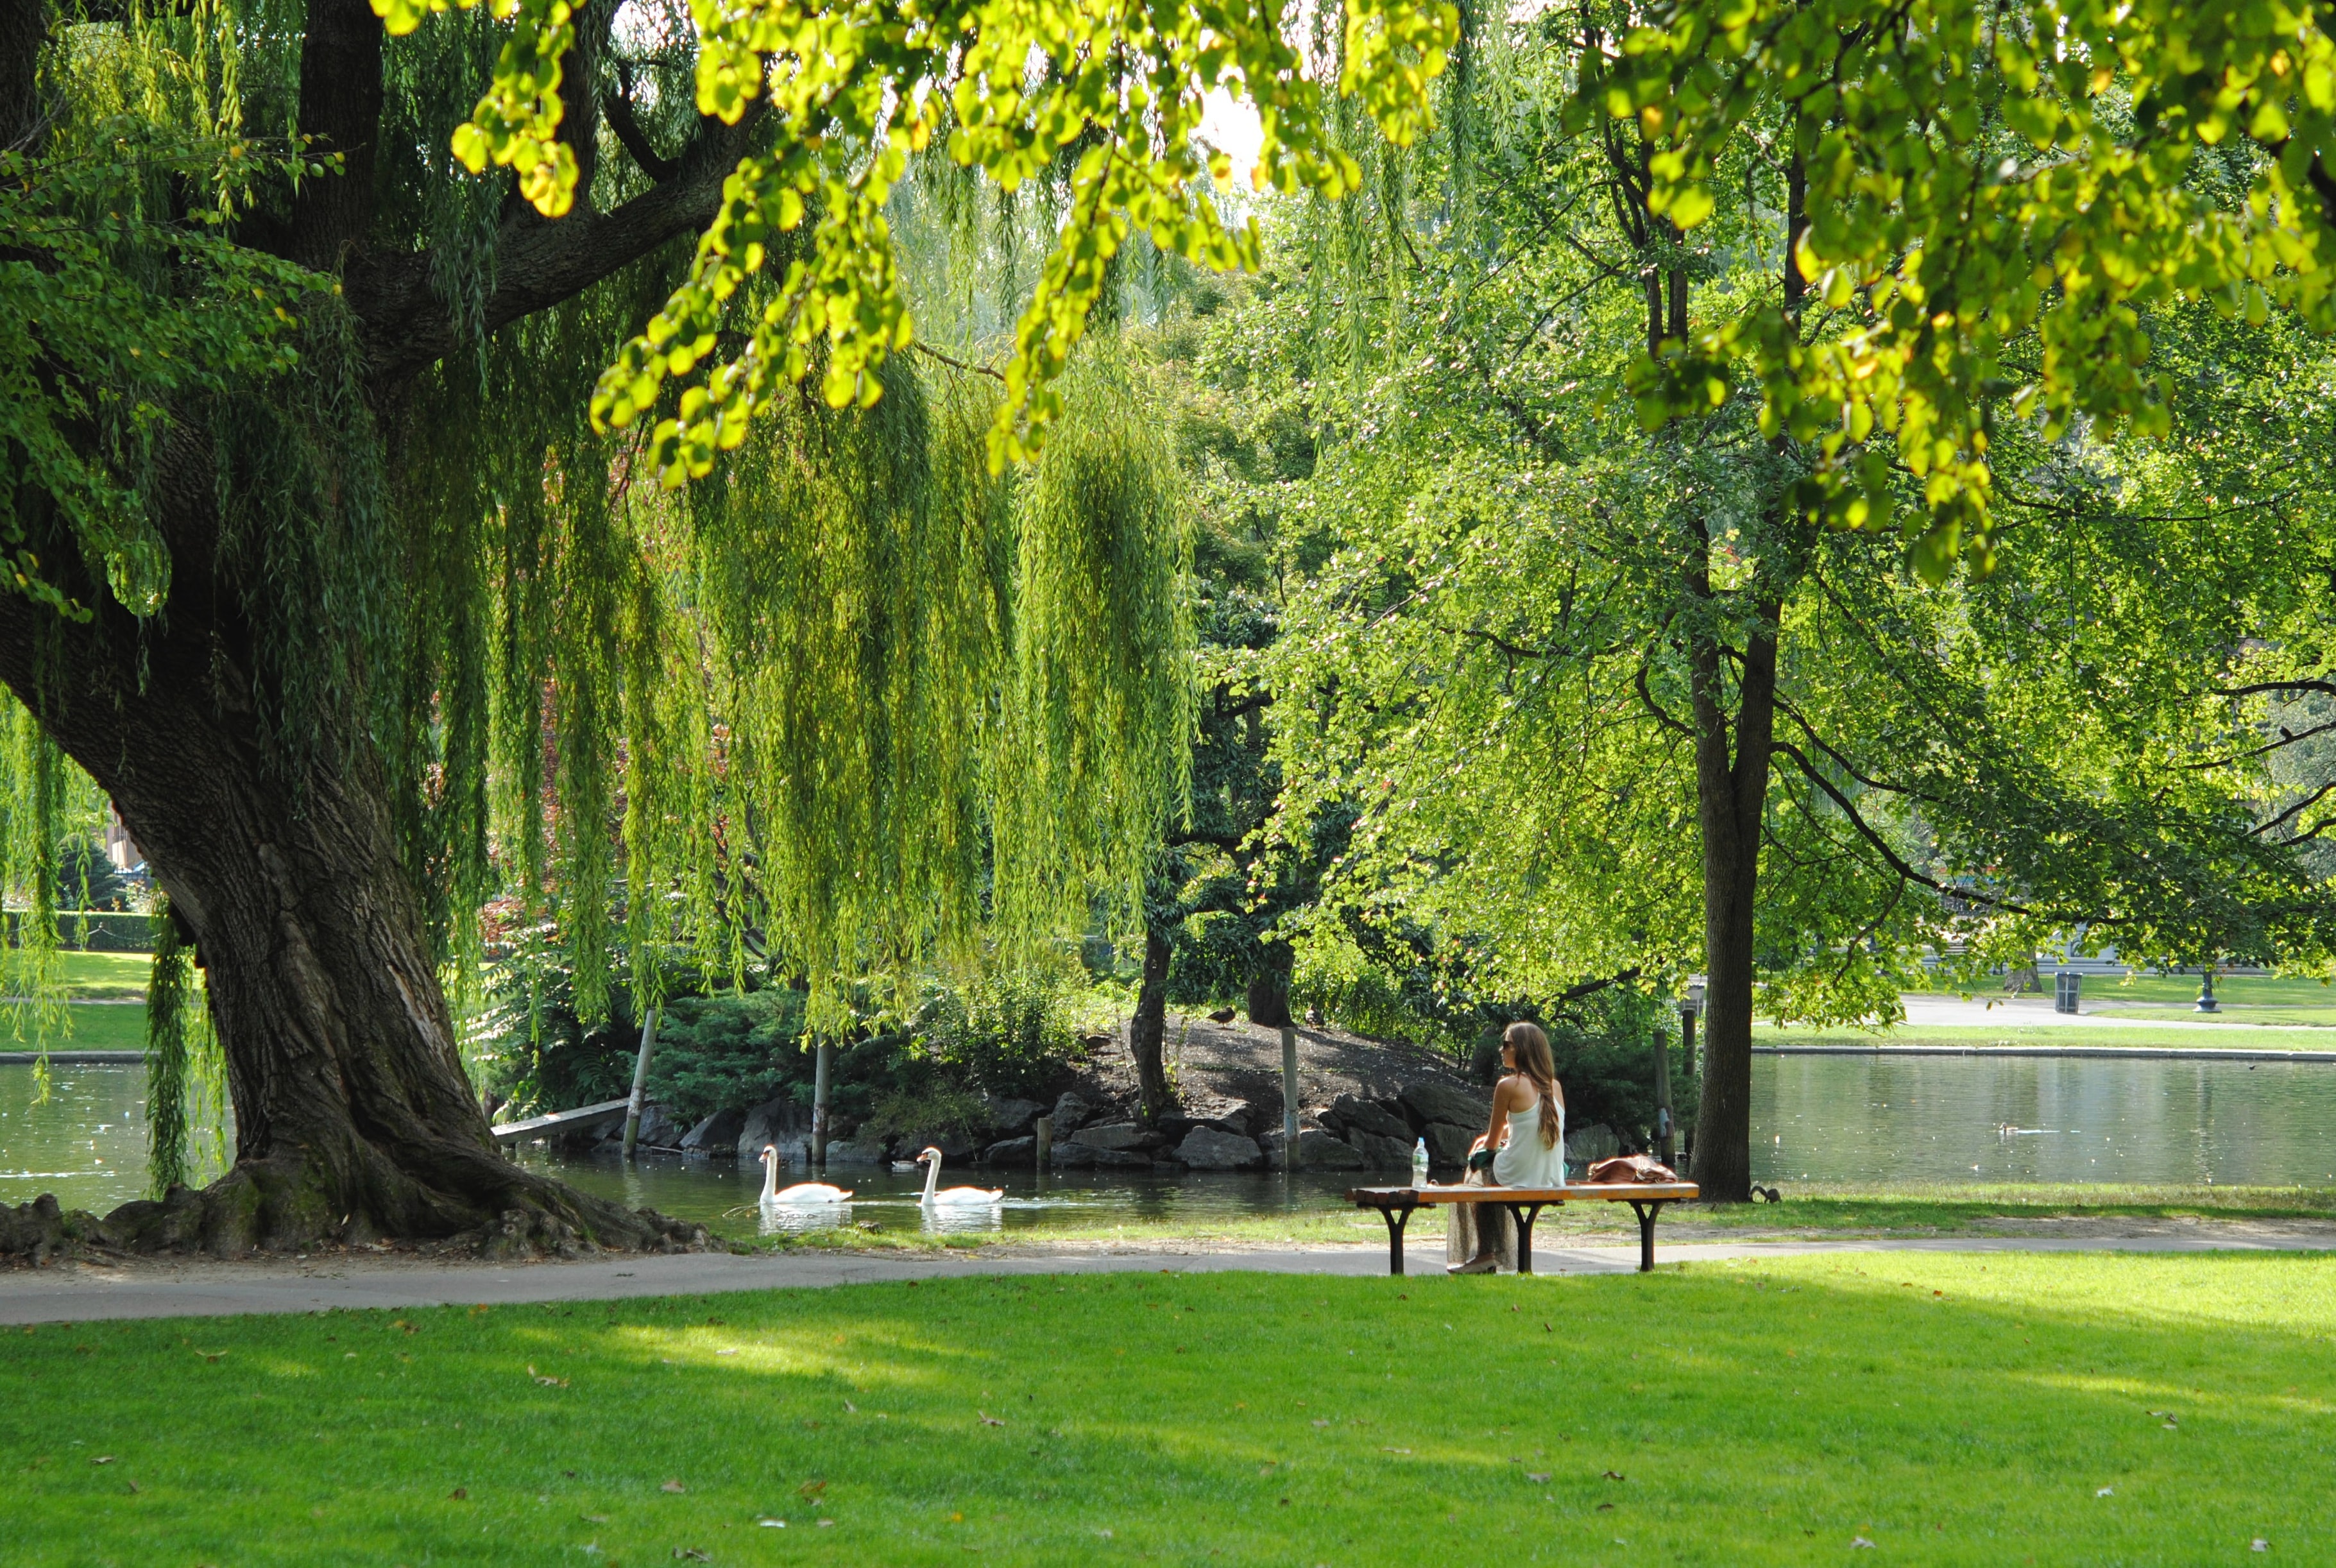 park with person sitting on a bench